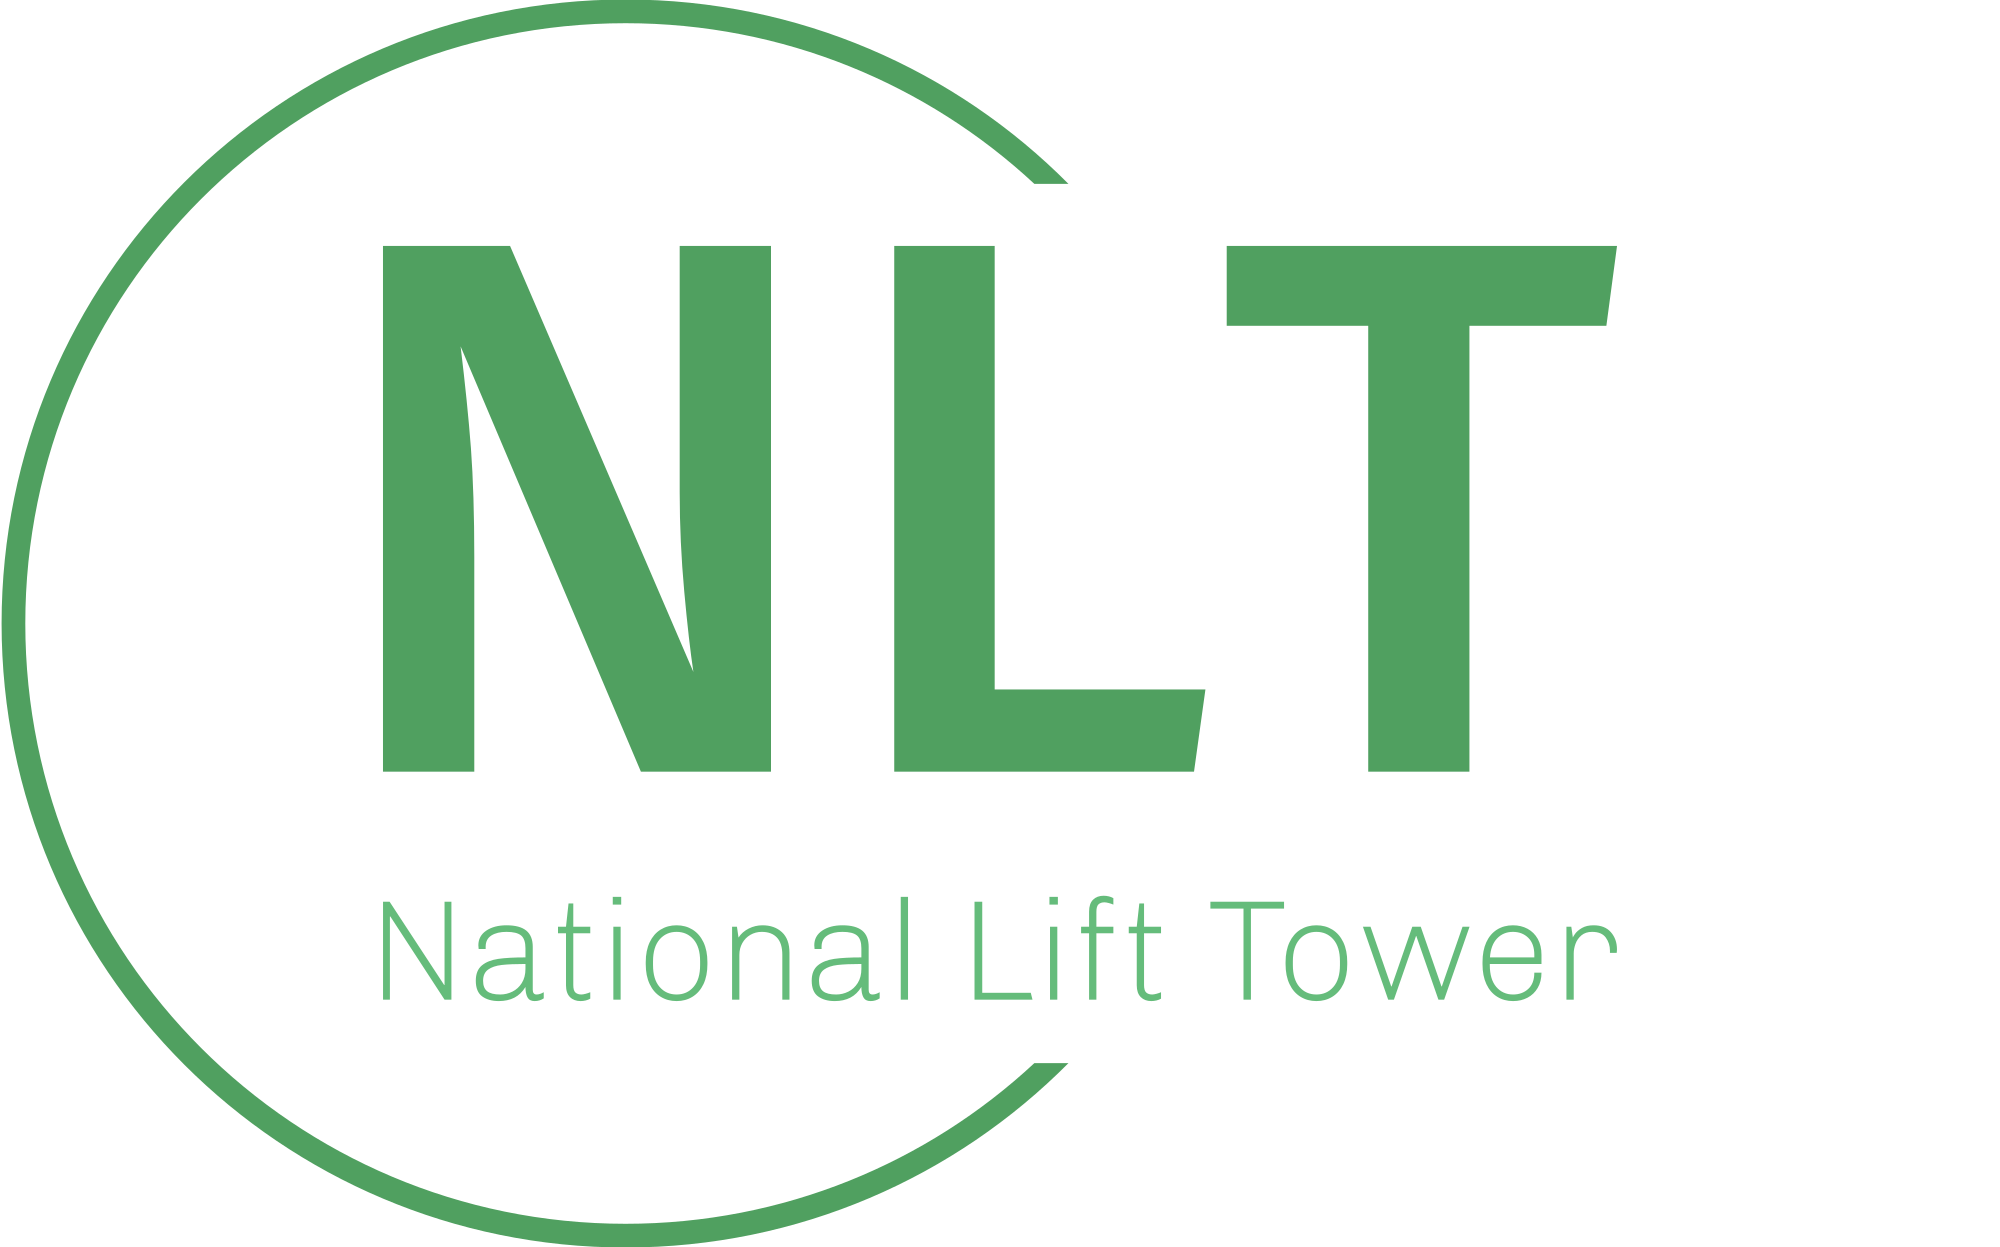 National Lift Tower